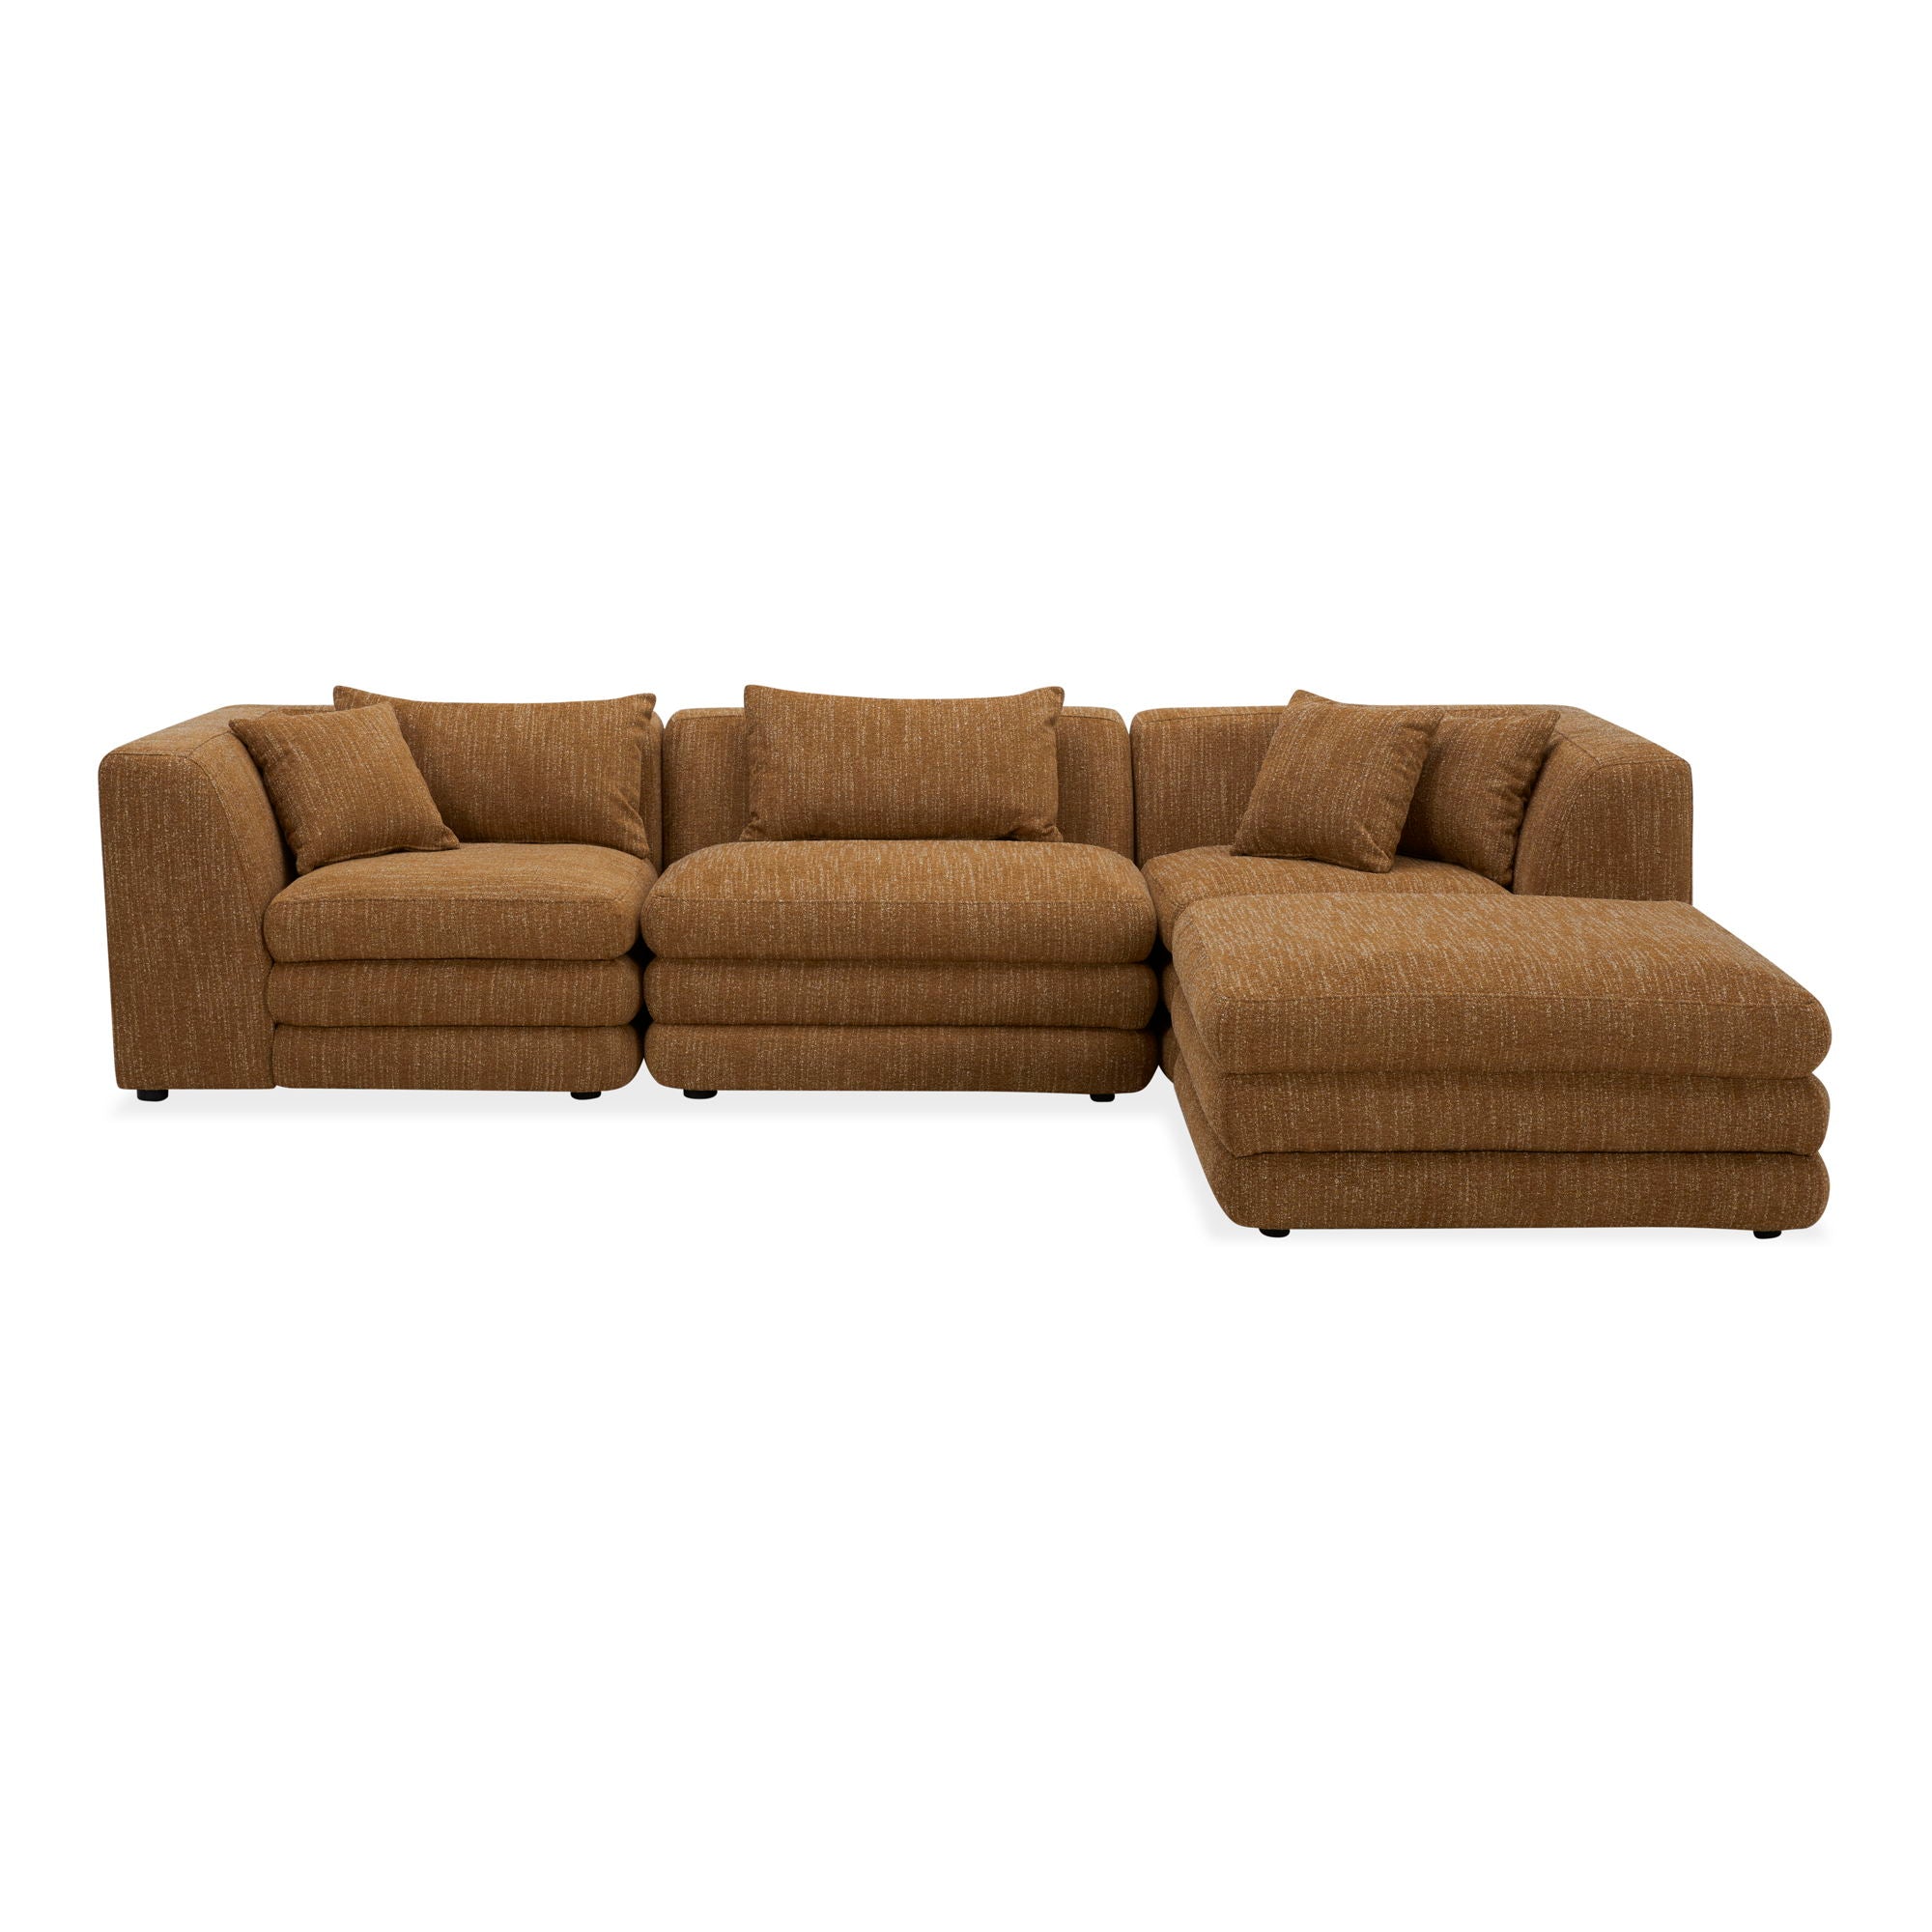 Lowtide - Lounge Modular Sectional - Amber Glow-Stationary Sectionals-American Furniture Outlet